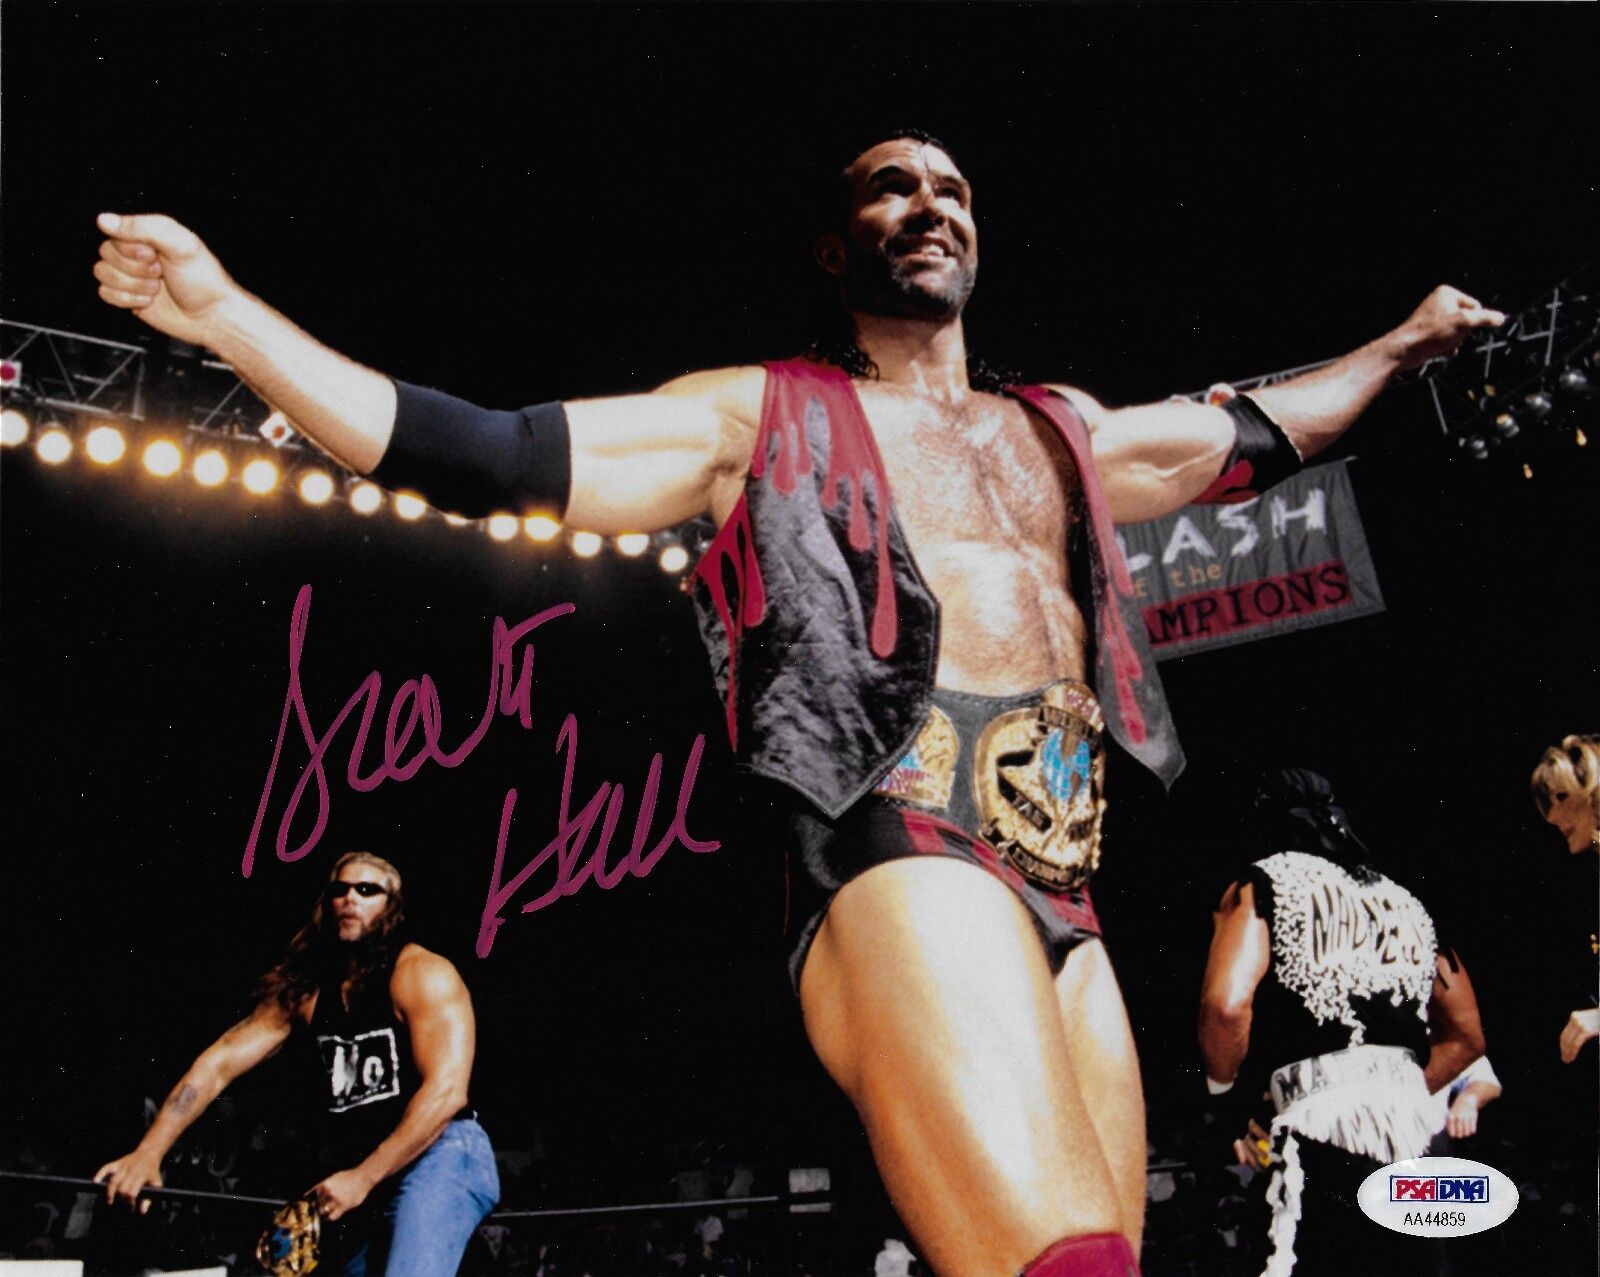 Scott Hall Signed WWE 8x10 Photo Poster painting PSA/DNA COA WCW NWO Picture Autograph w/ Belt